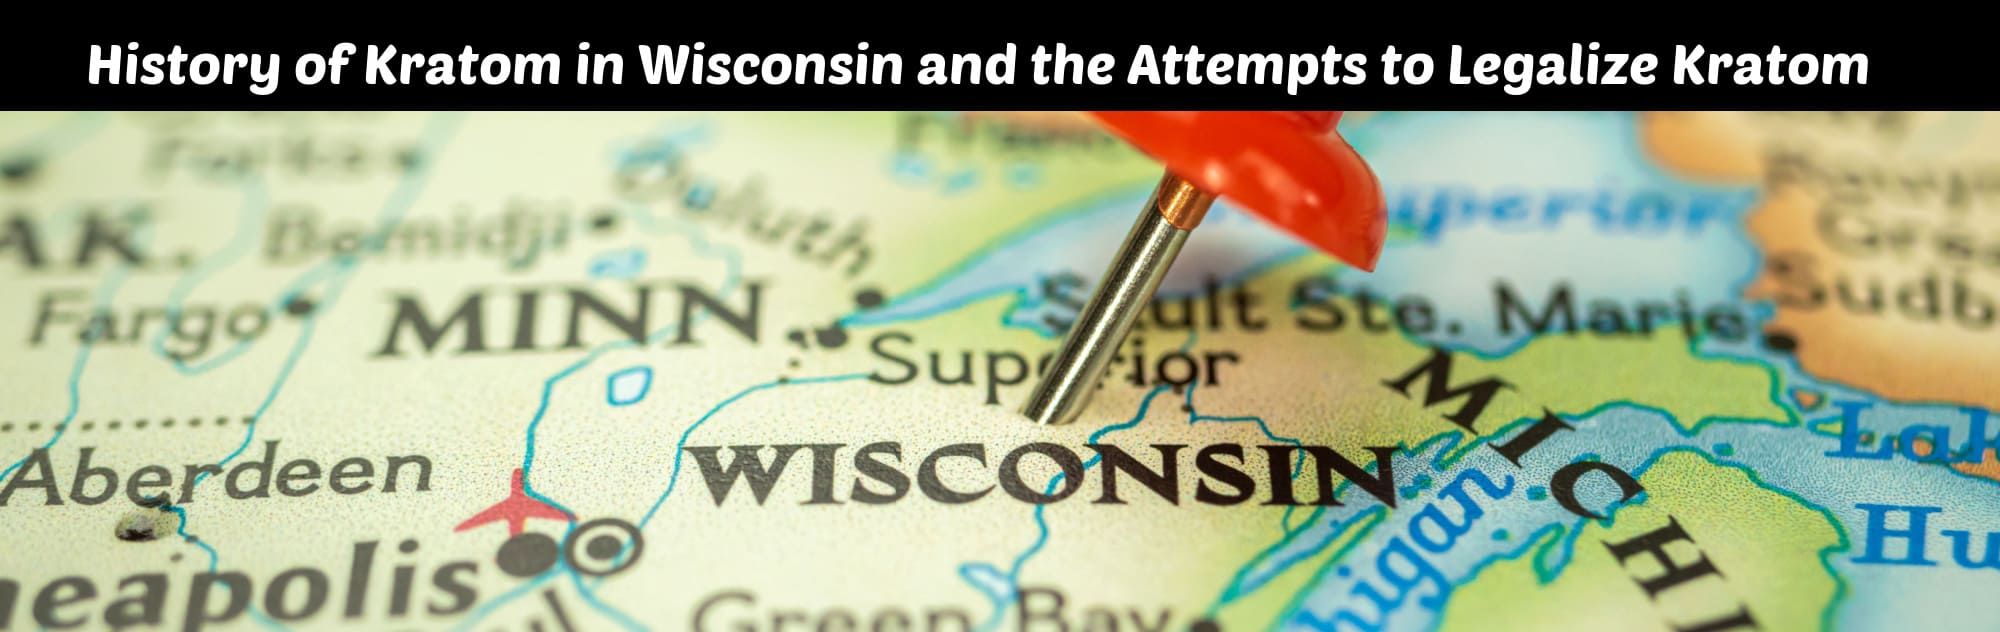 Is Kratom Legal in Wisconsin? Learn the Facts and History, and Predict Its Future